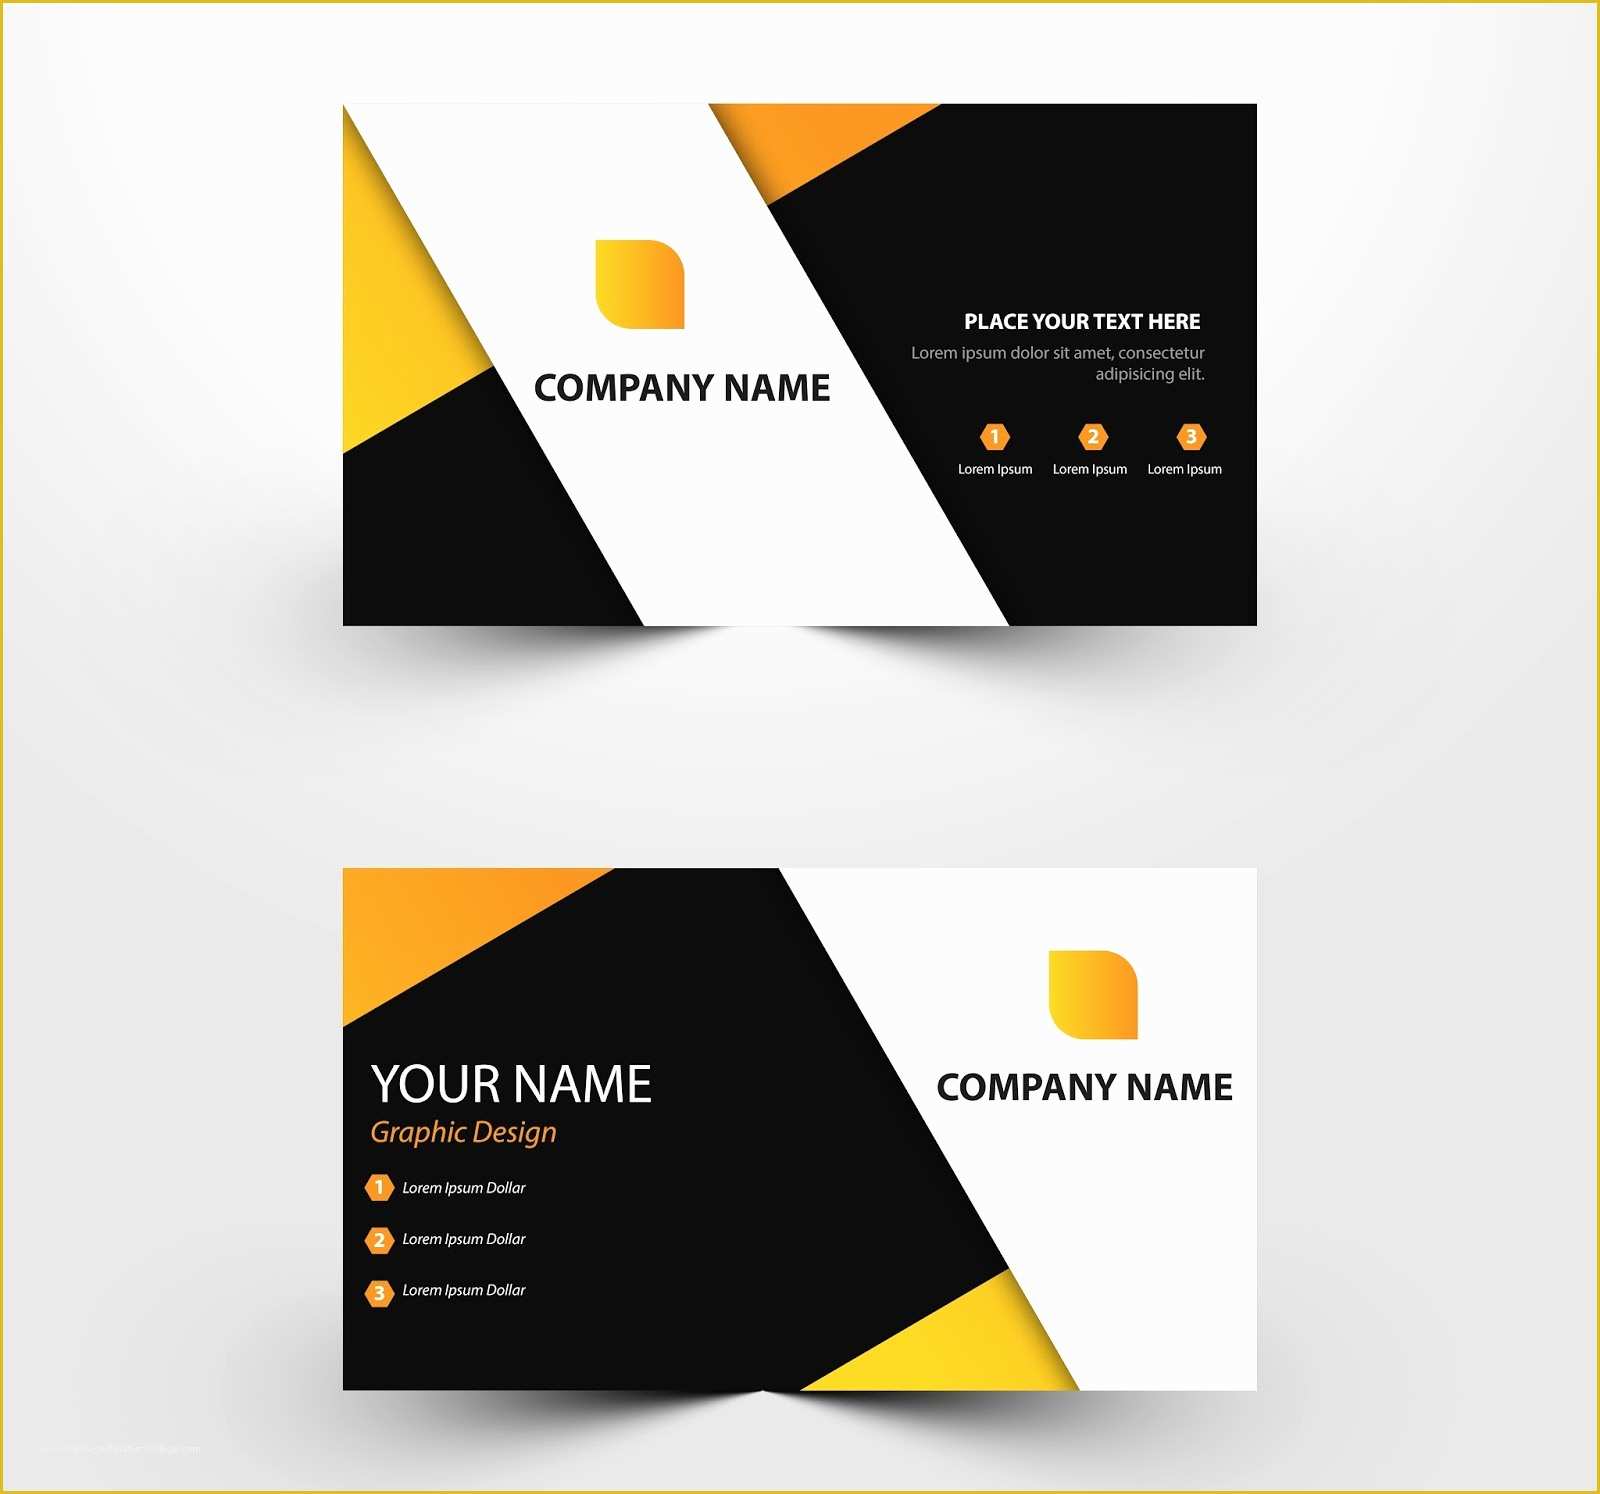 Business Card Template Ai File Free Download Of Free Download Business Card Templates Ai Files & Psd Files